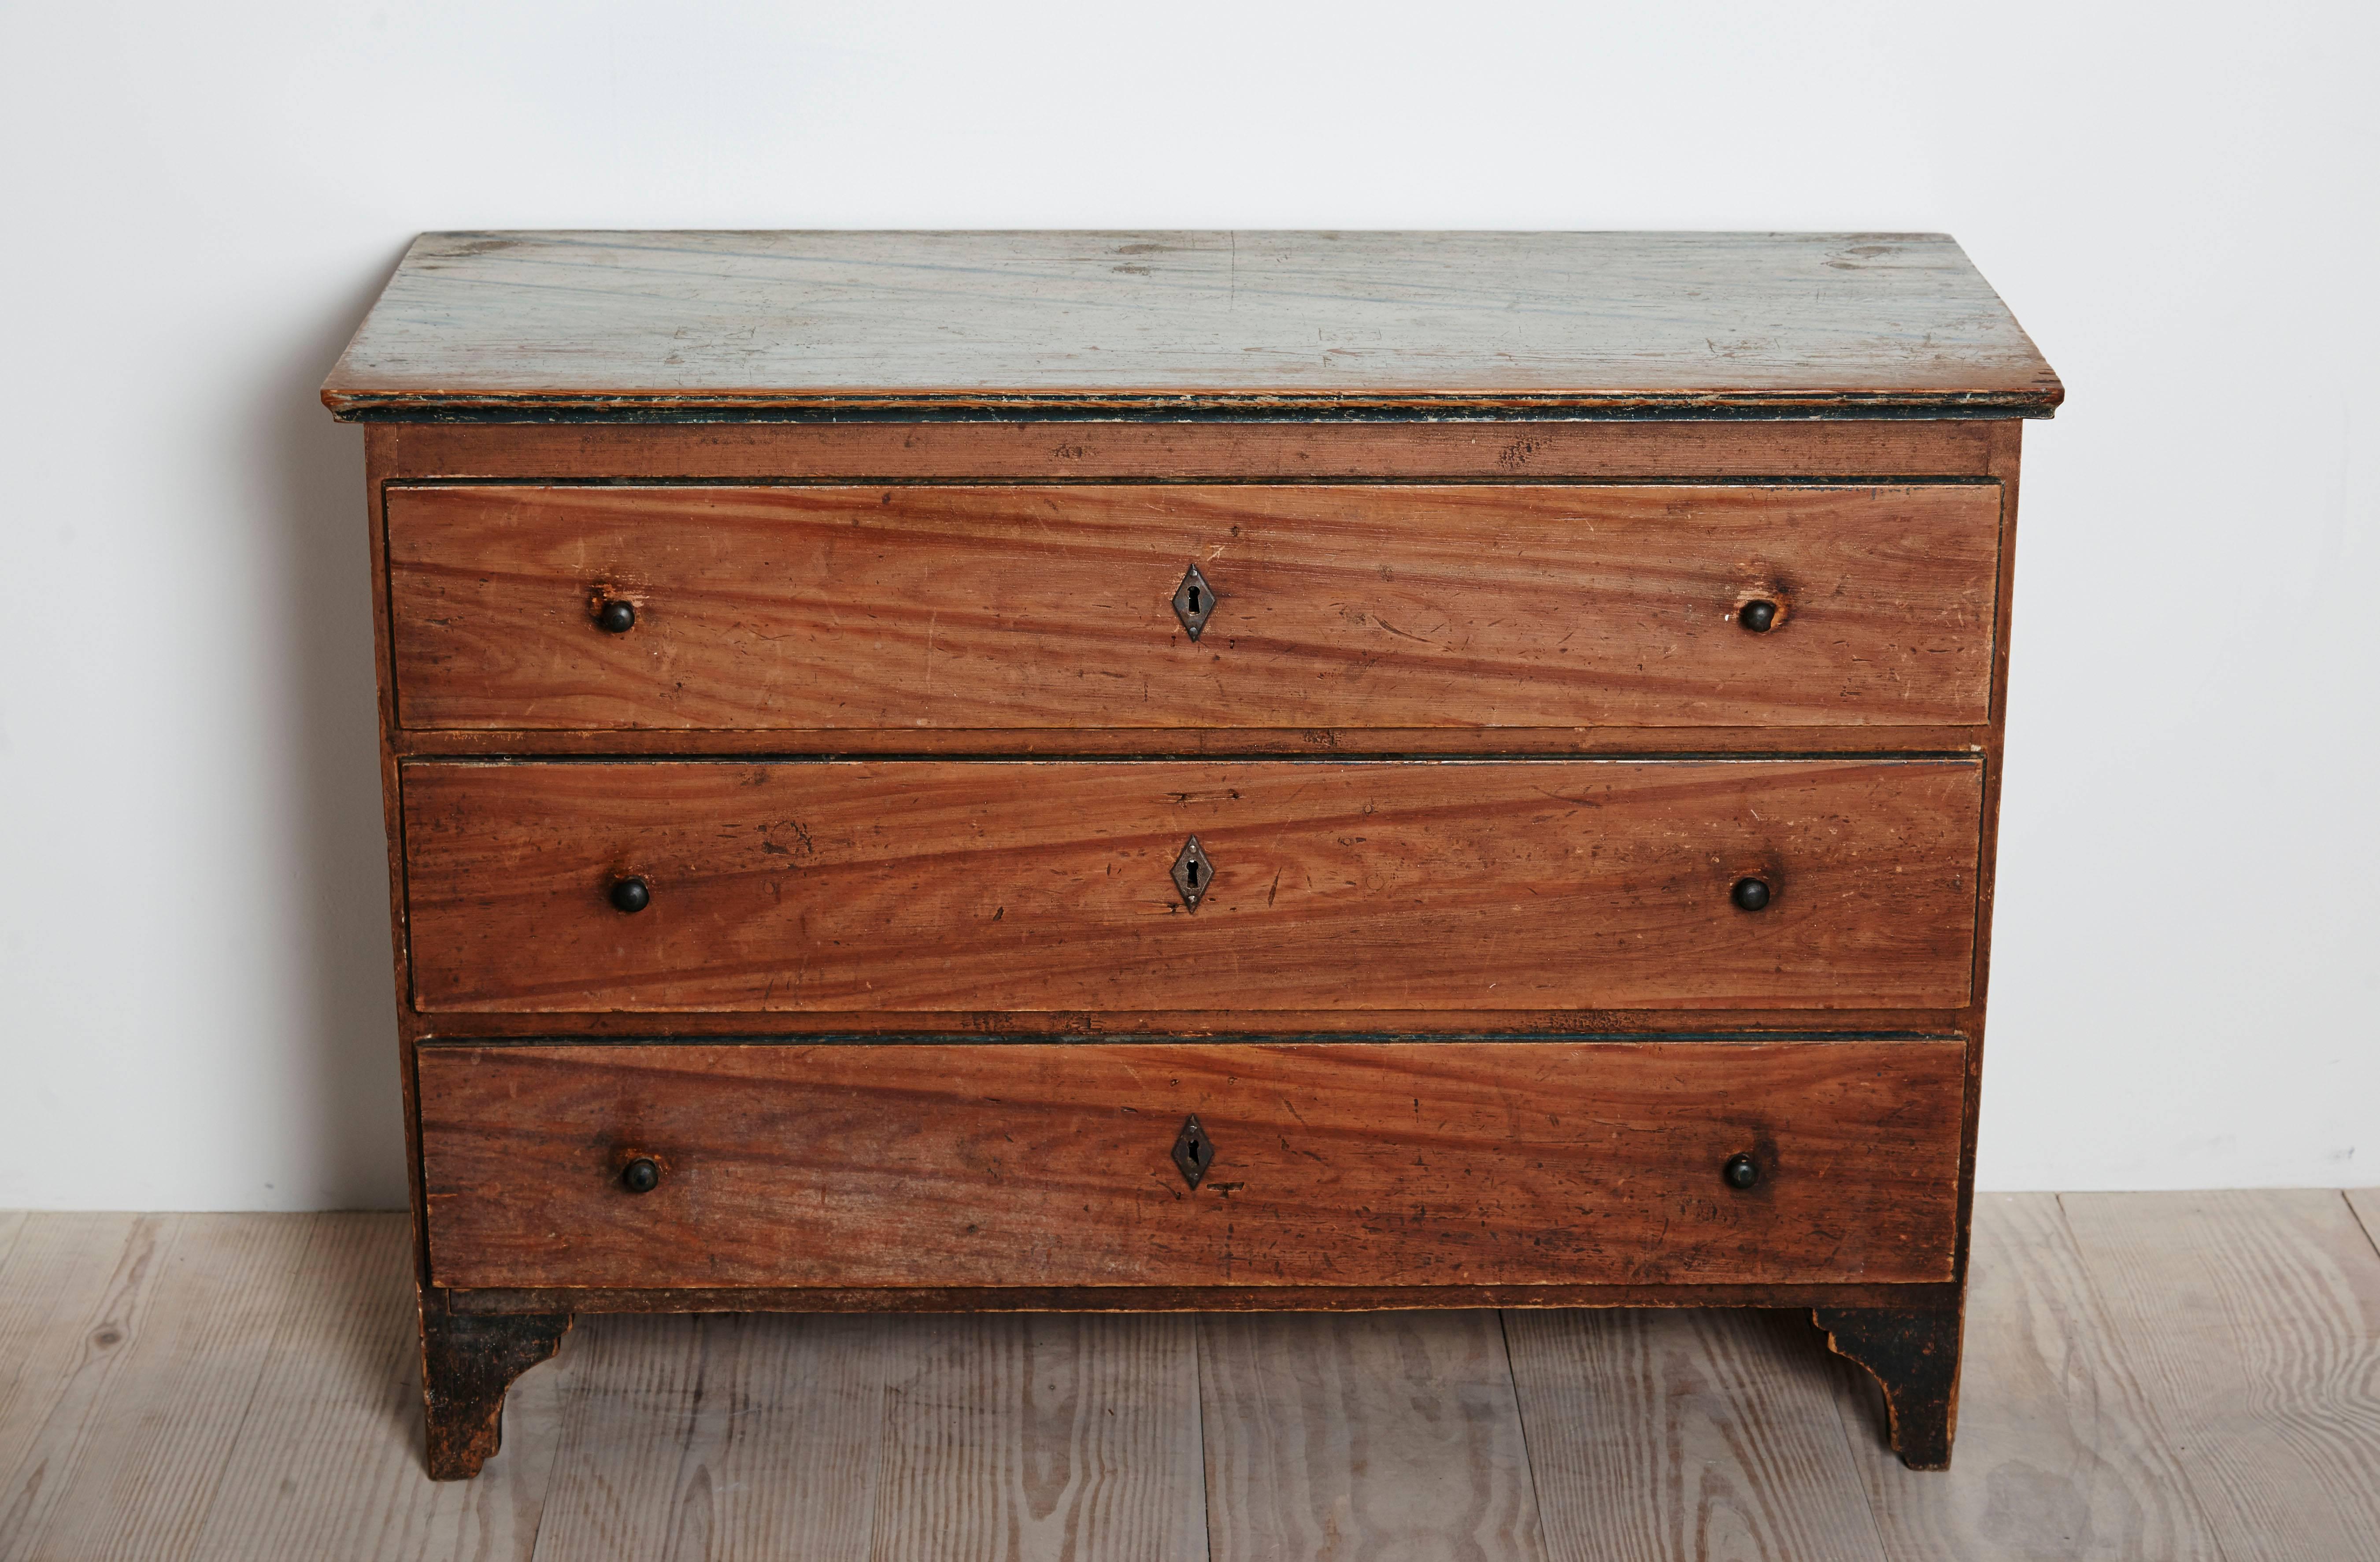 Pine Allmoge Commode with Faux Bois and Faux Marble Finish, Sweden, Dated 1842